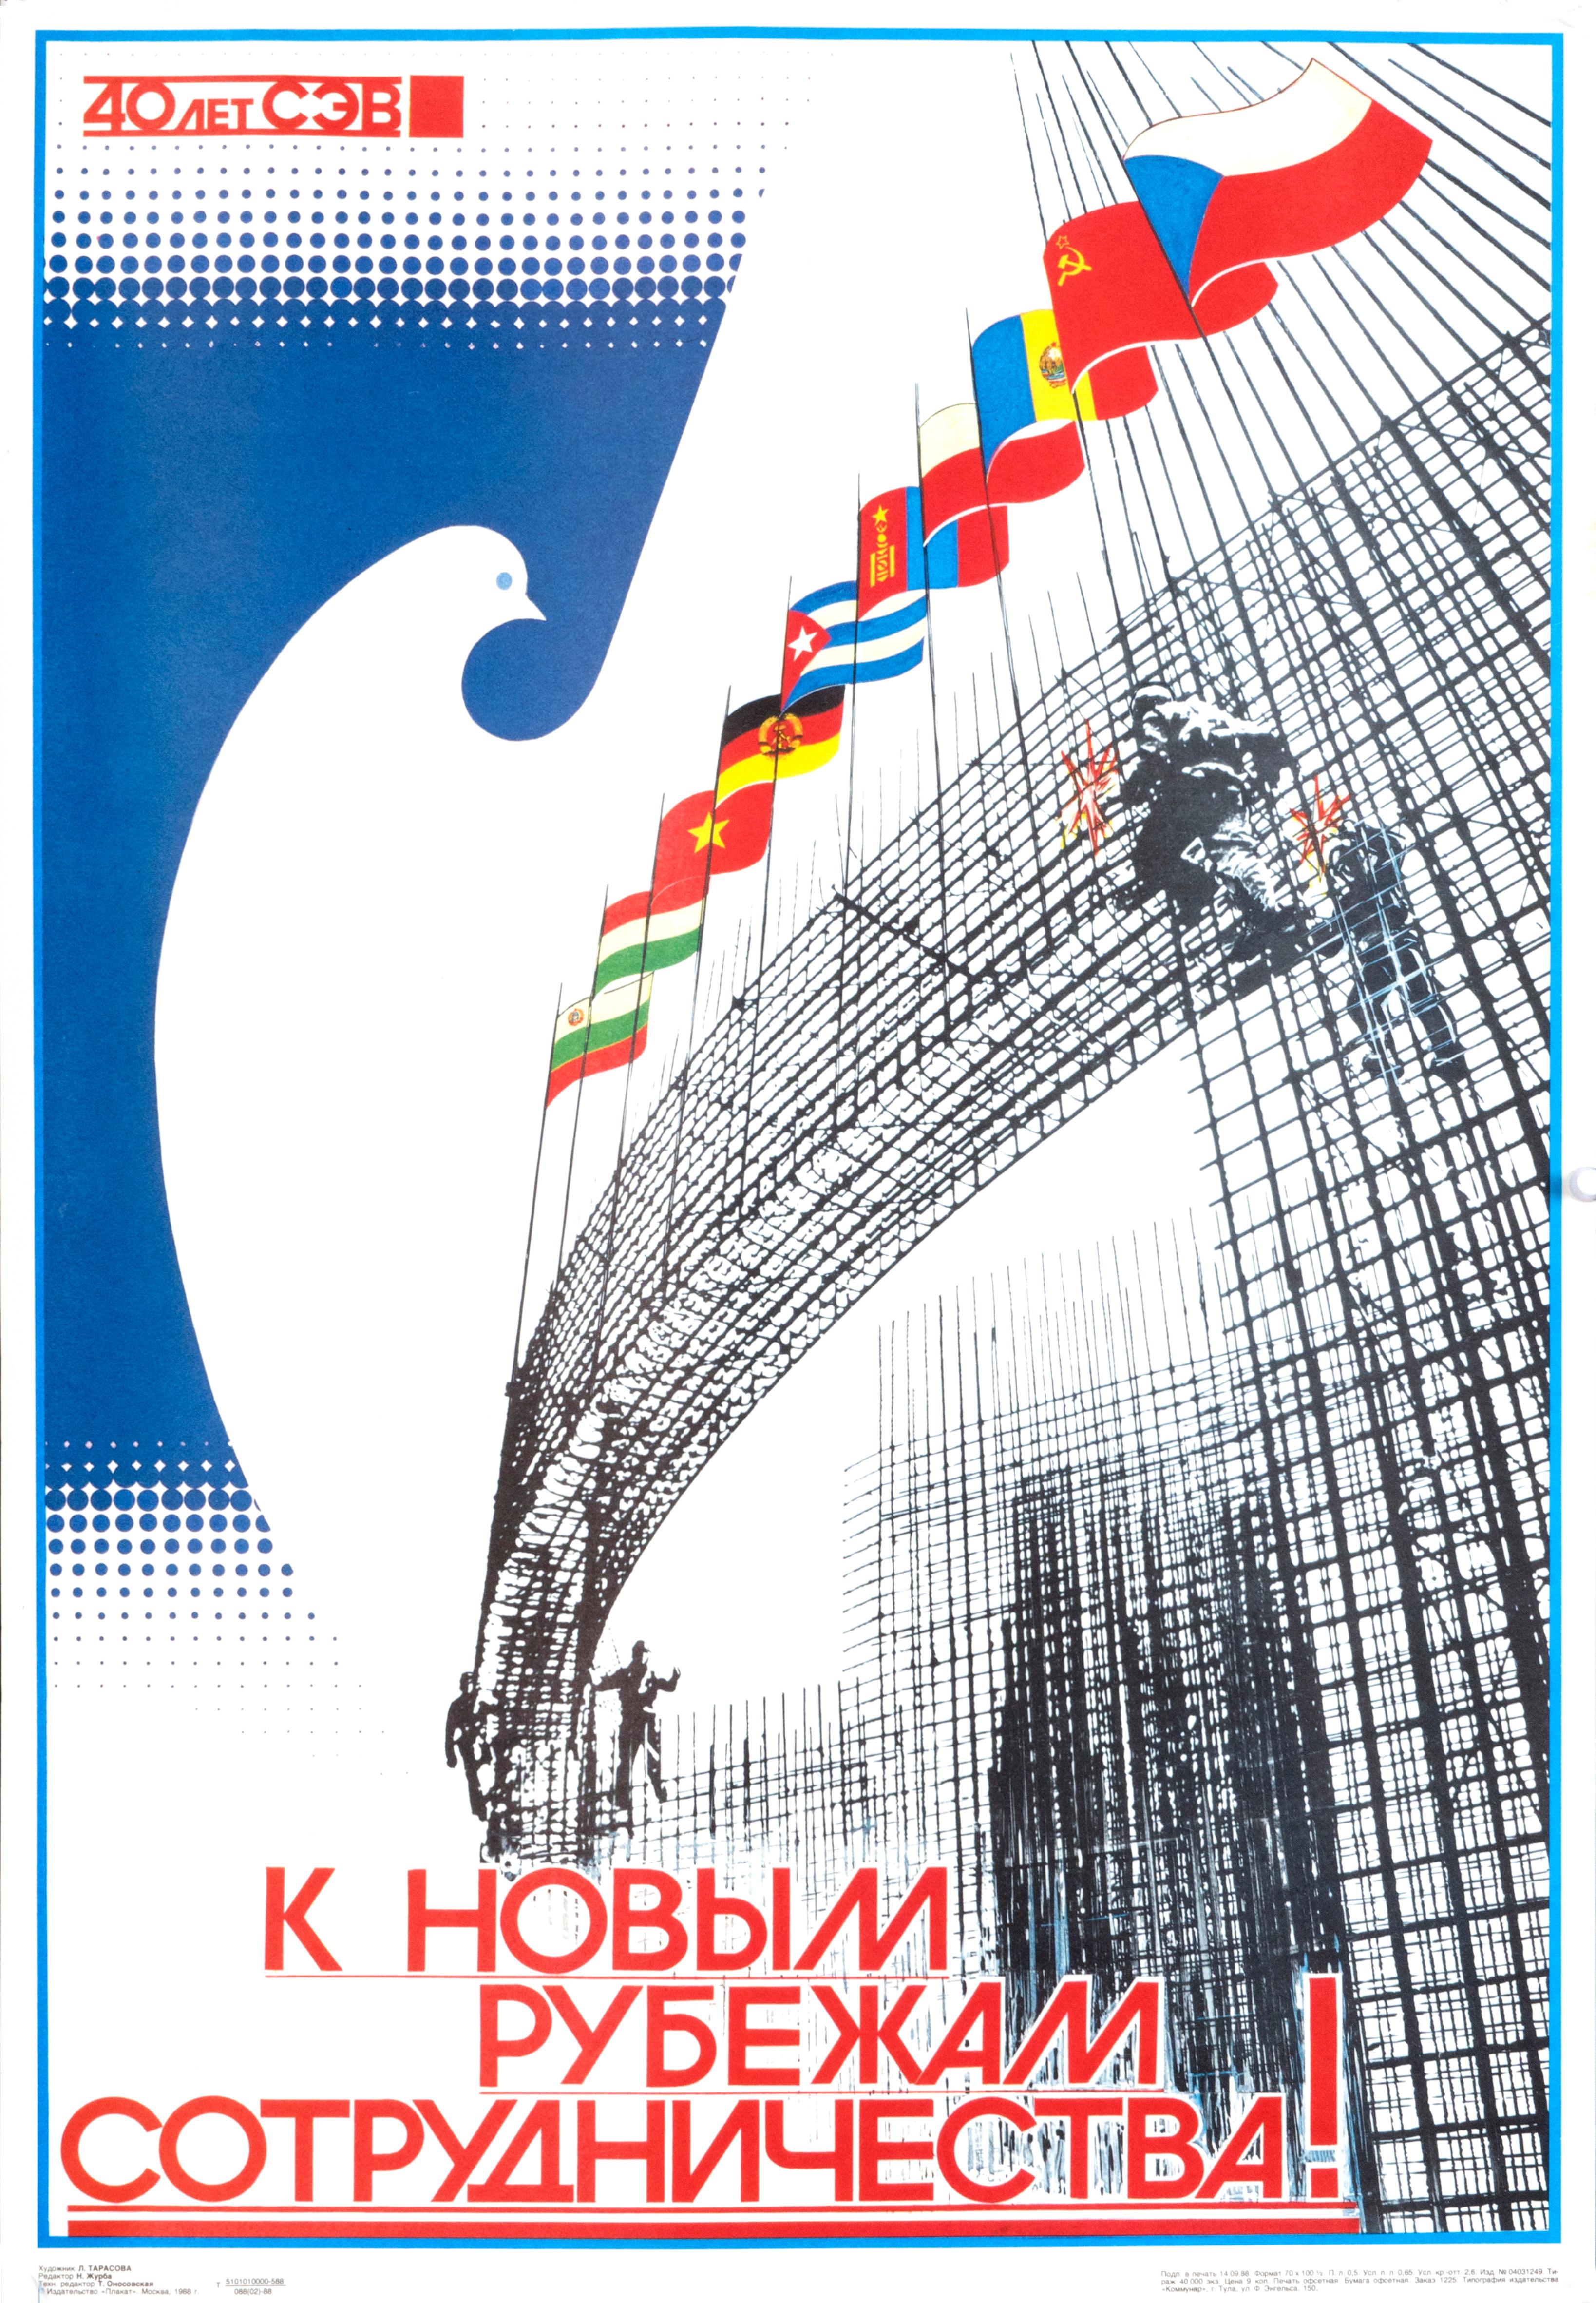 "The Council for Economic Cooperation - 40 Years Old!" Perestroika Era Poster - Print by L. Tarasova